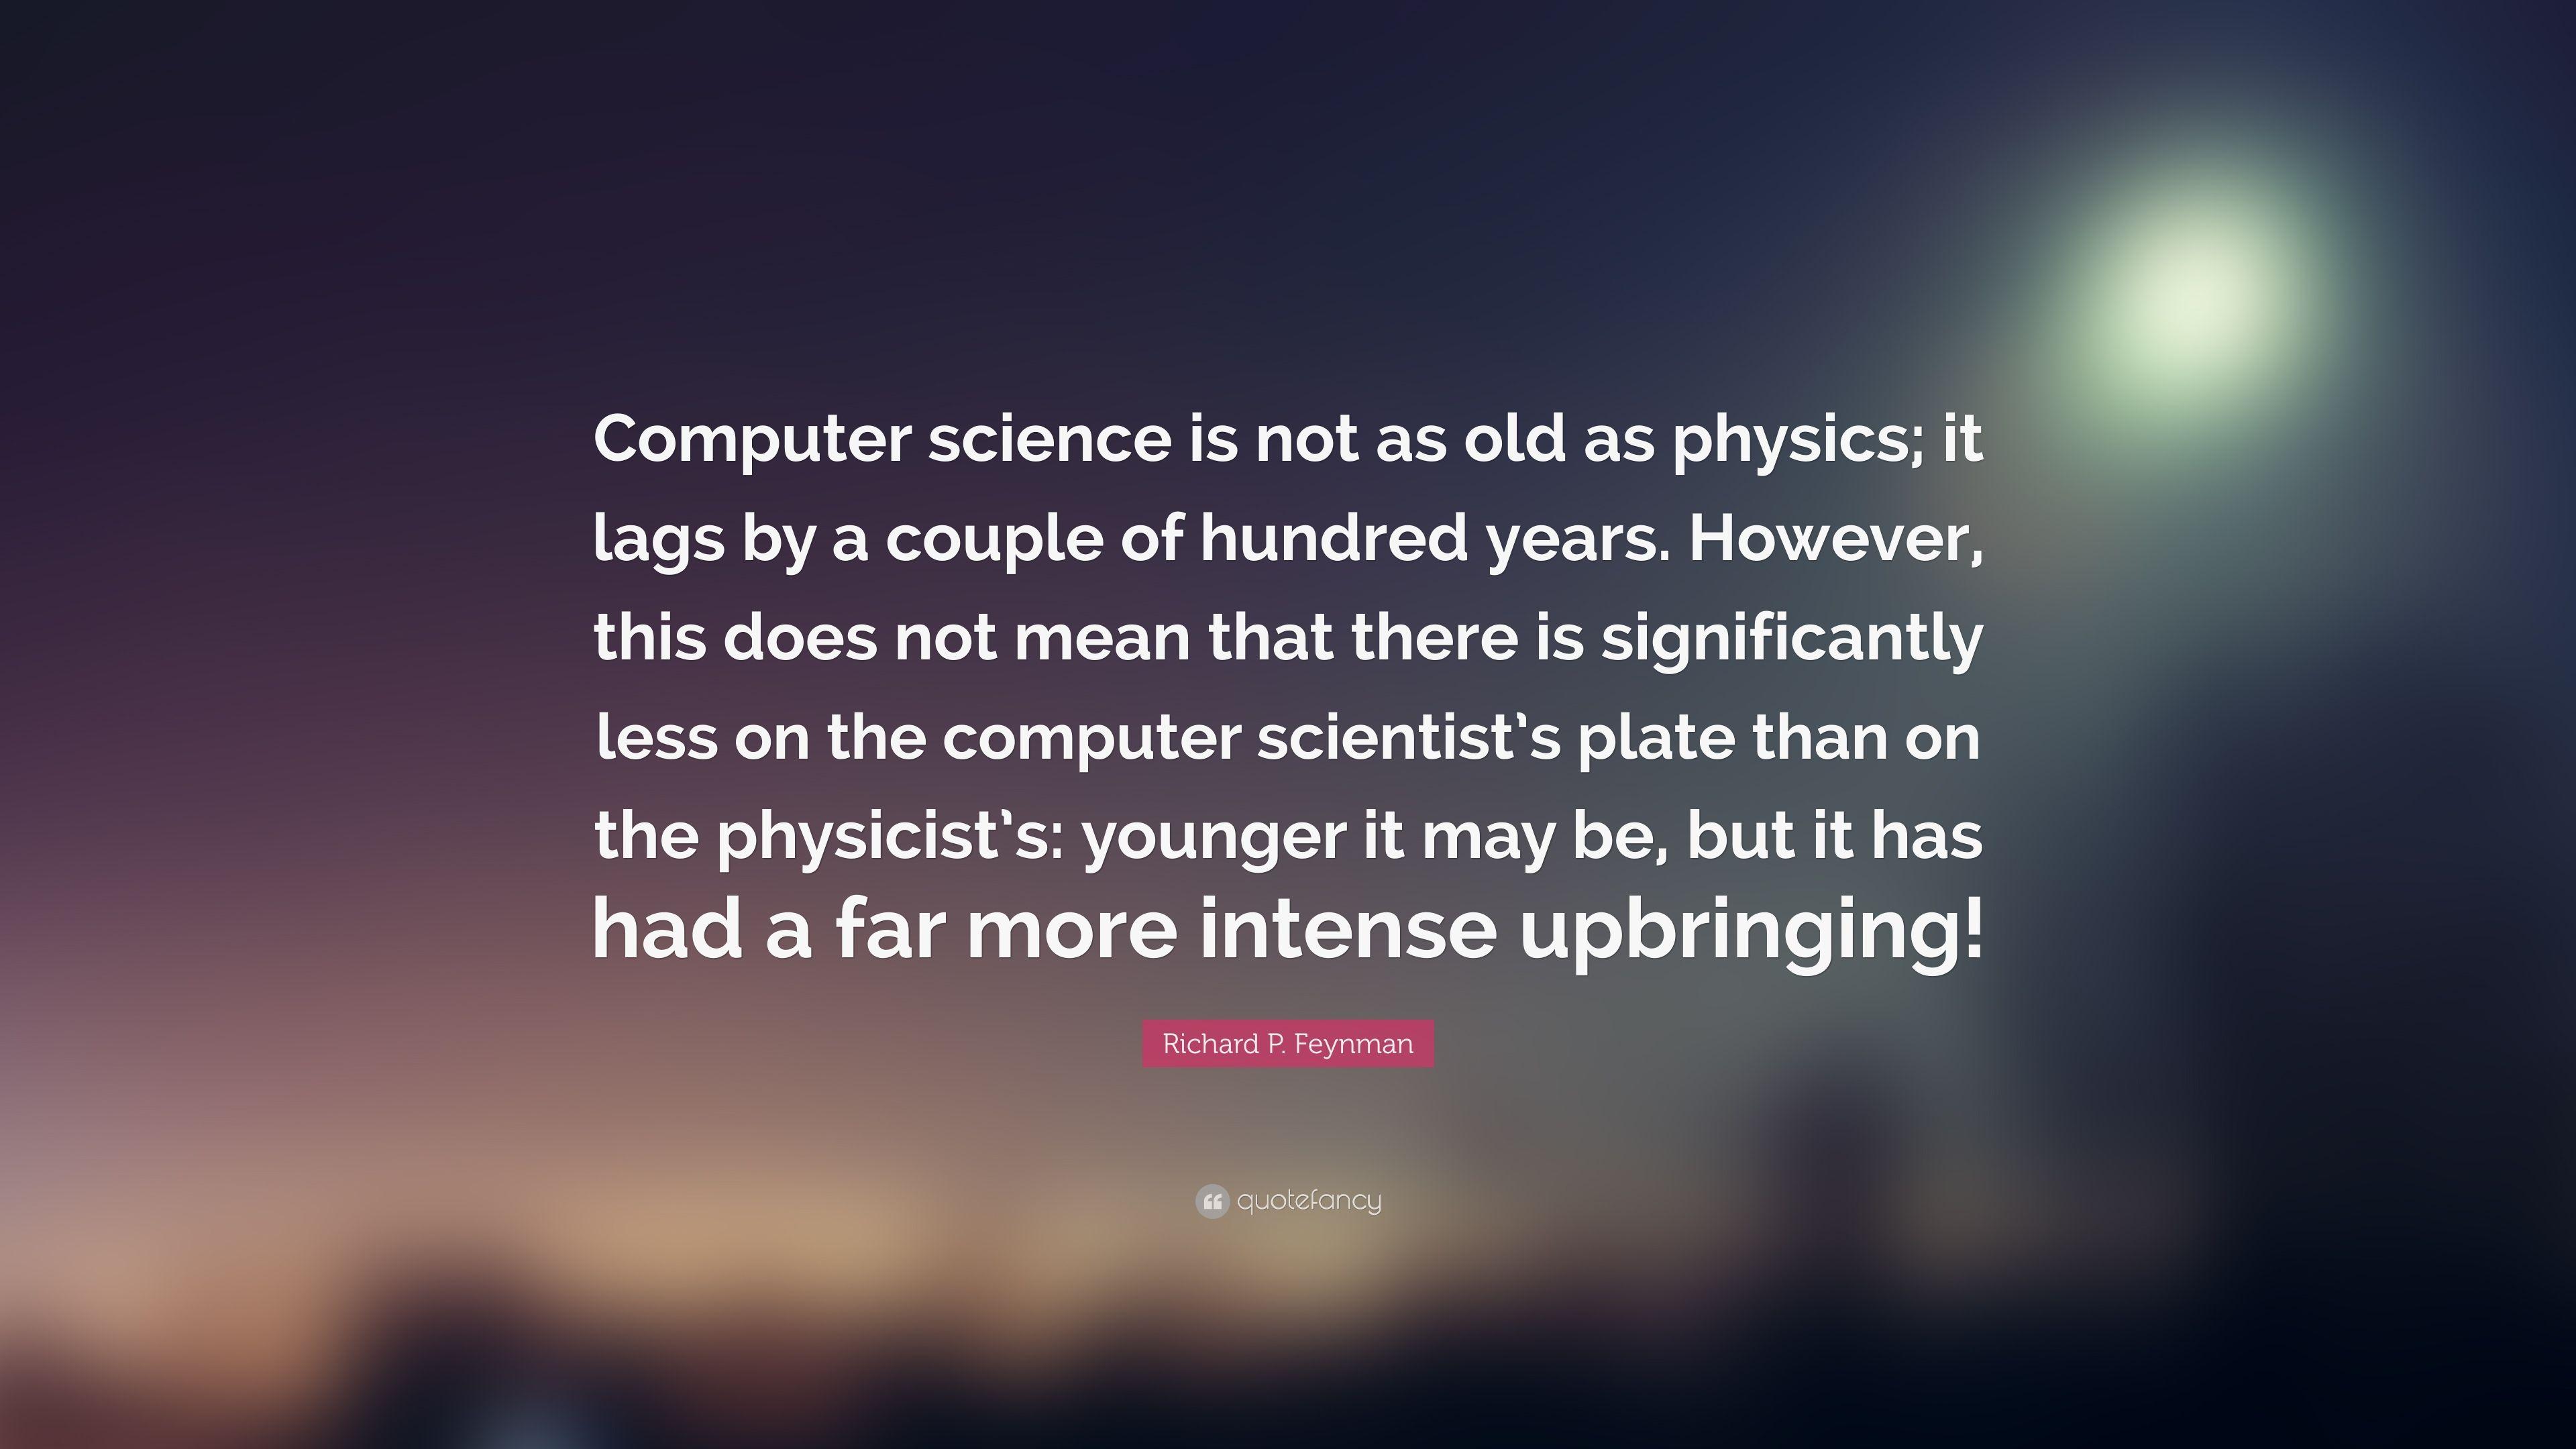 Richard P. Feynman Quote: “Computer science is not as old as